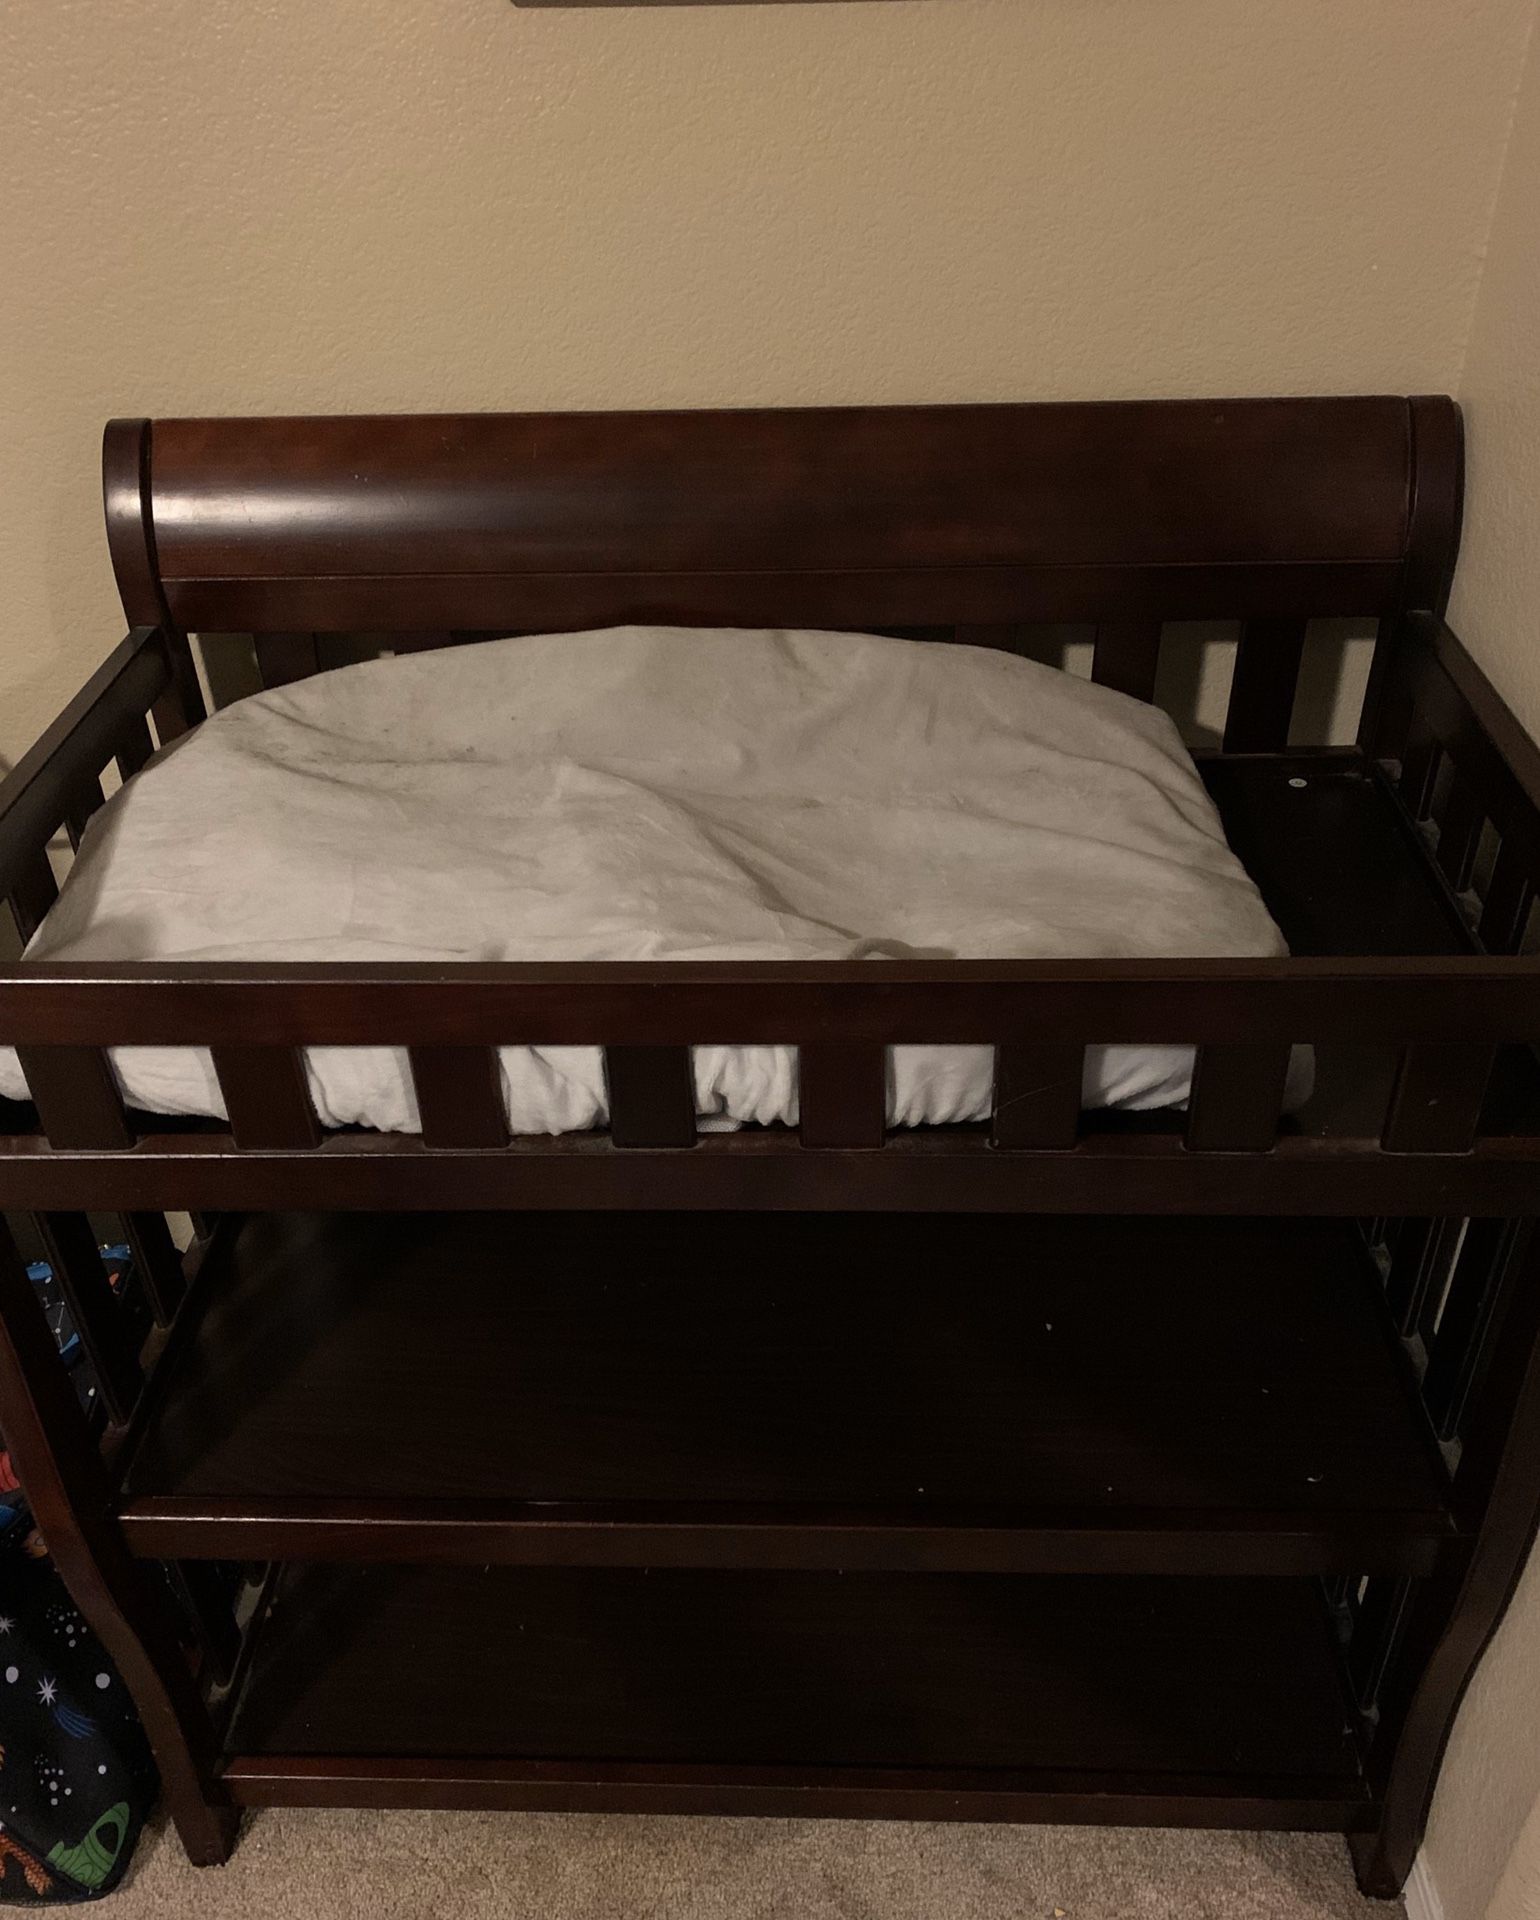 Diaper changing table/station